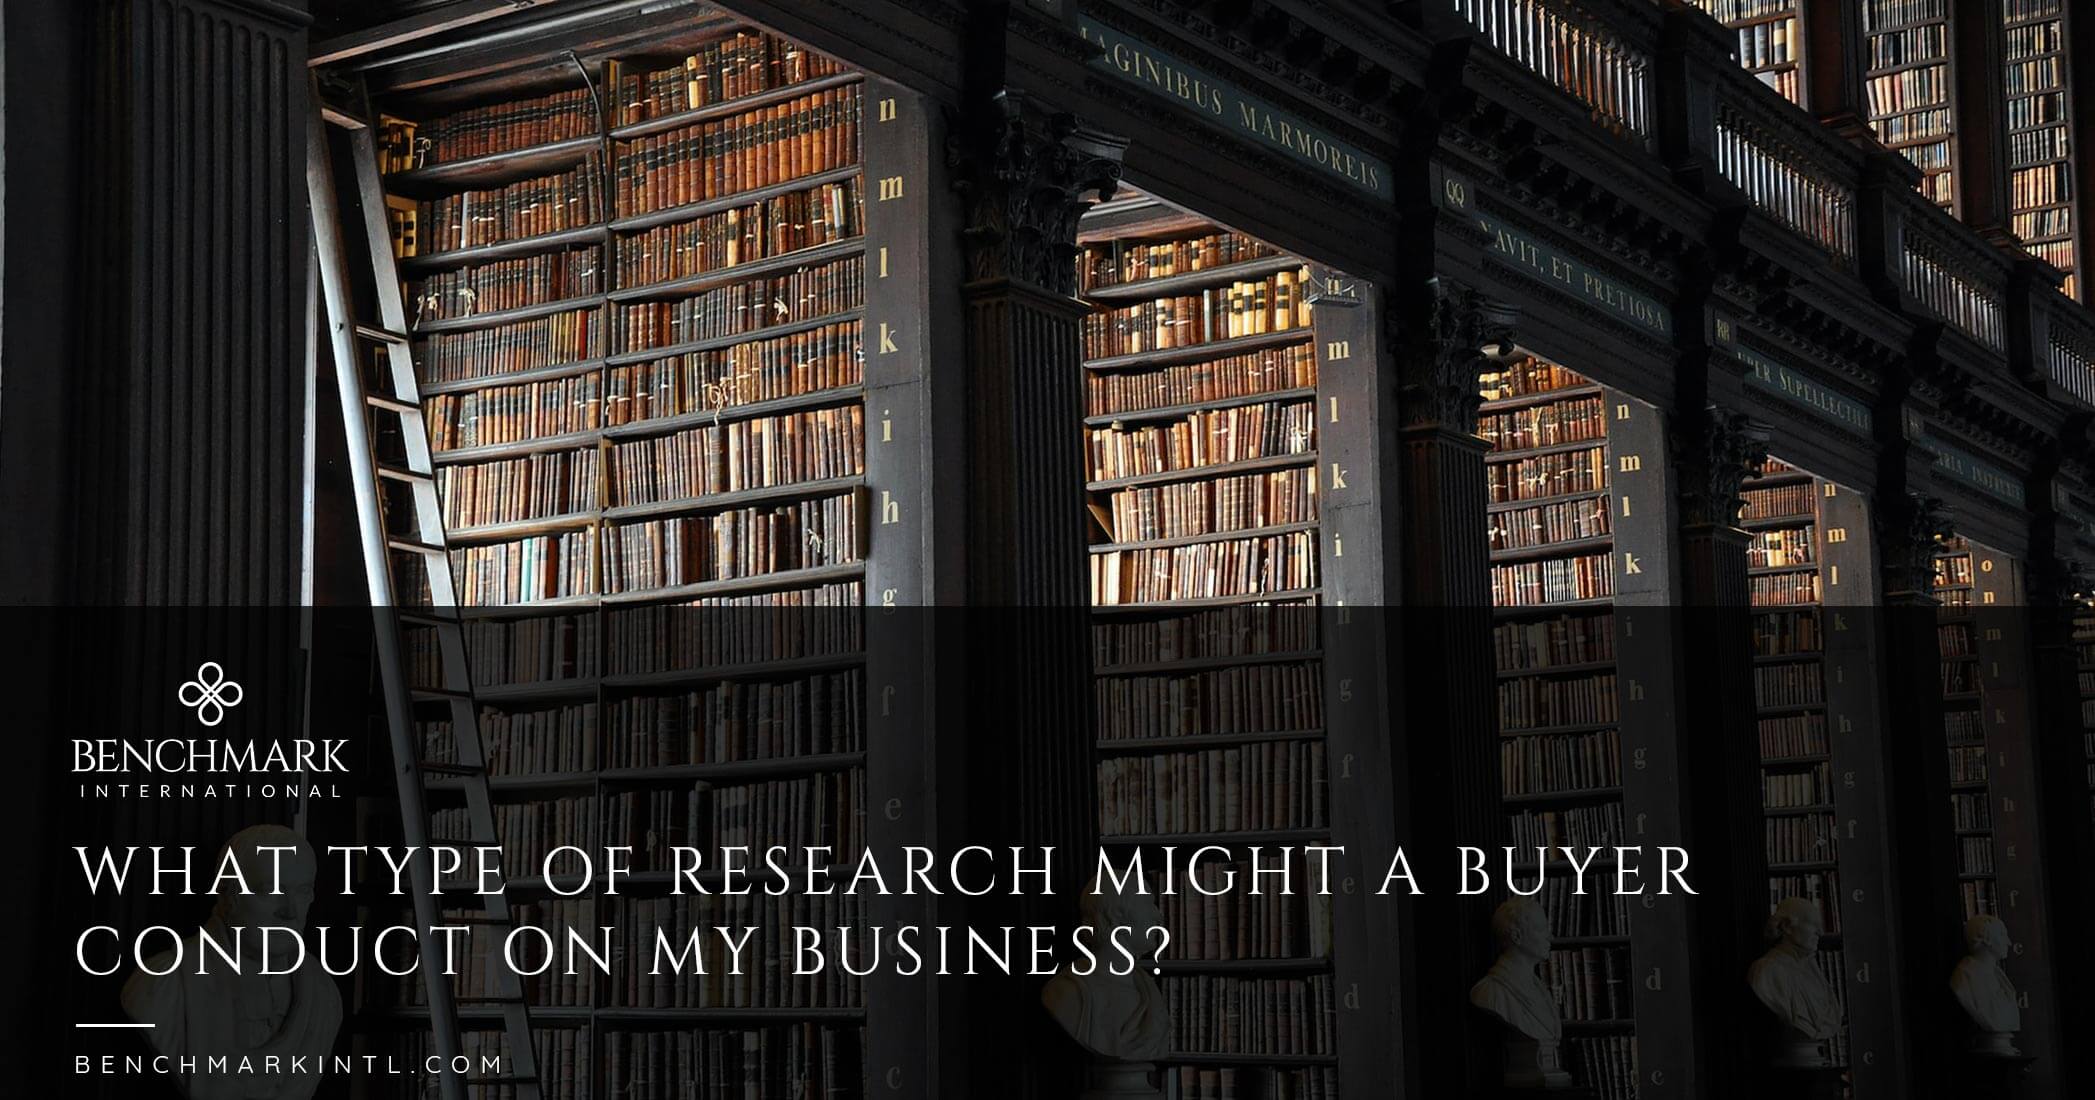 What Type Of Research Might A Buyer Conduct On My Business?